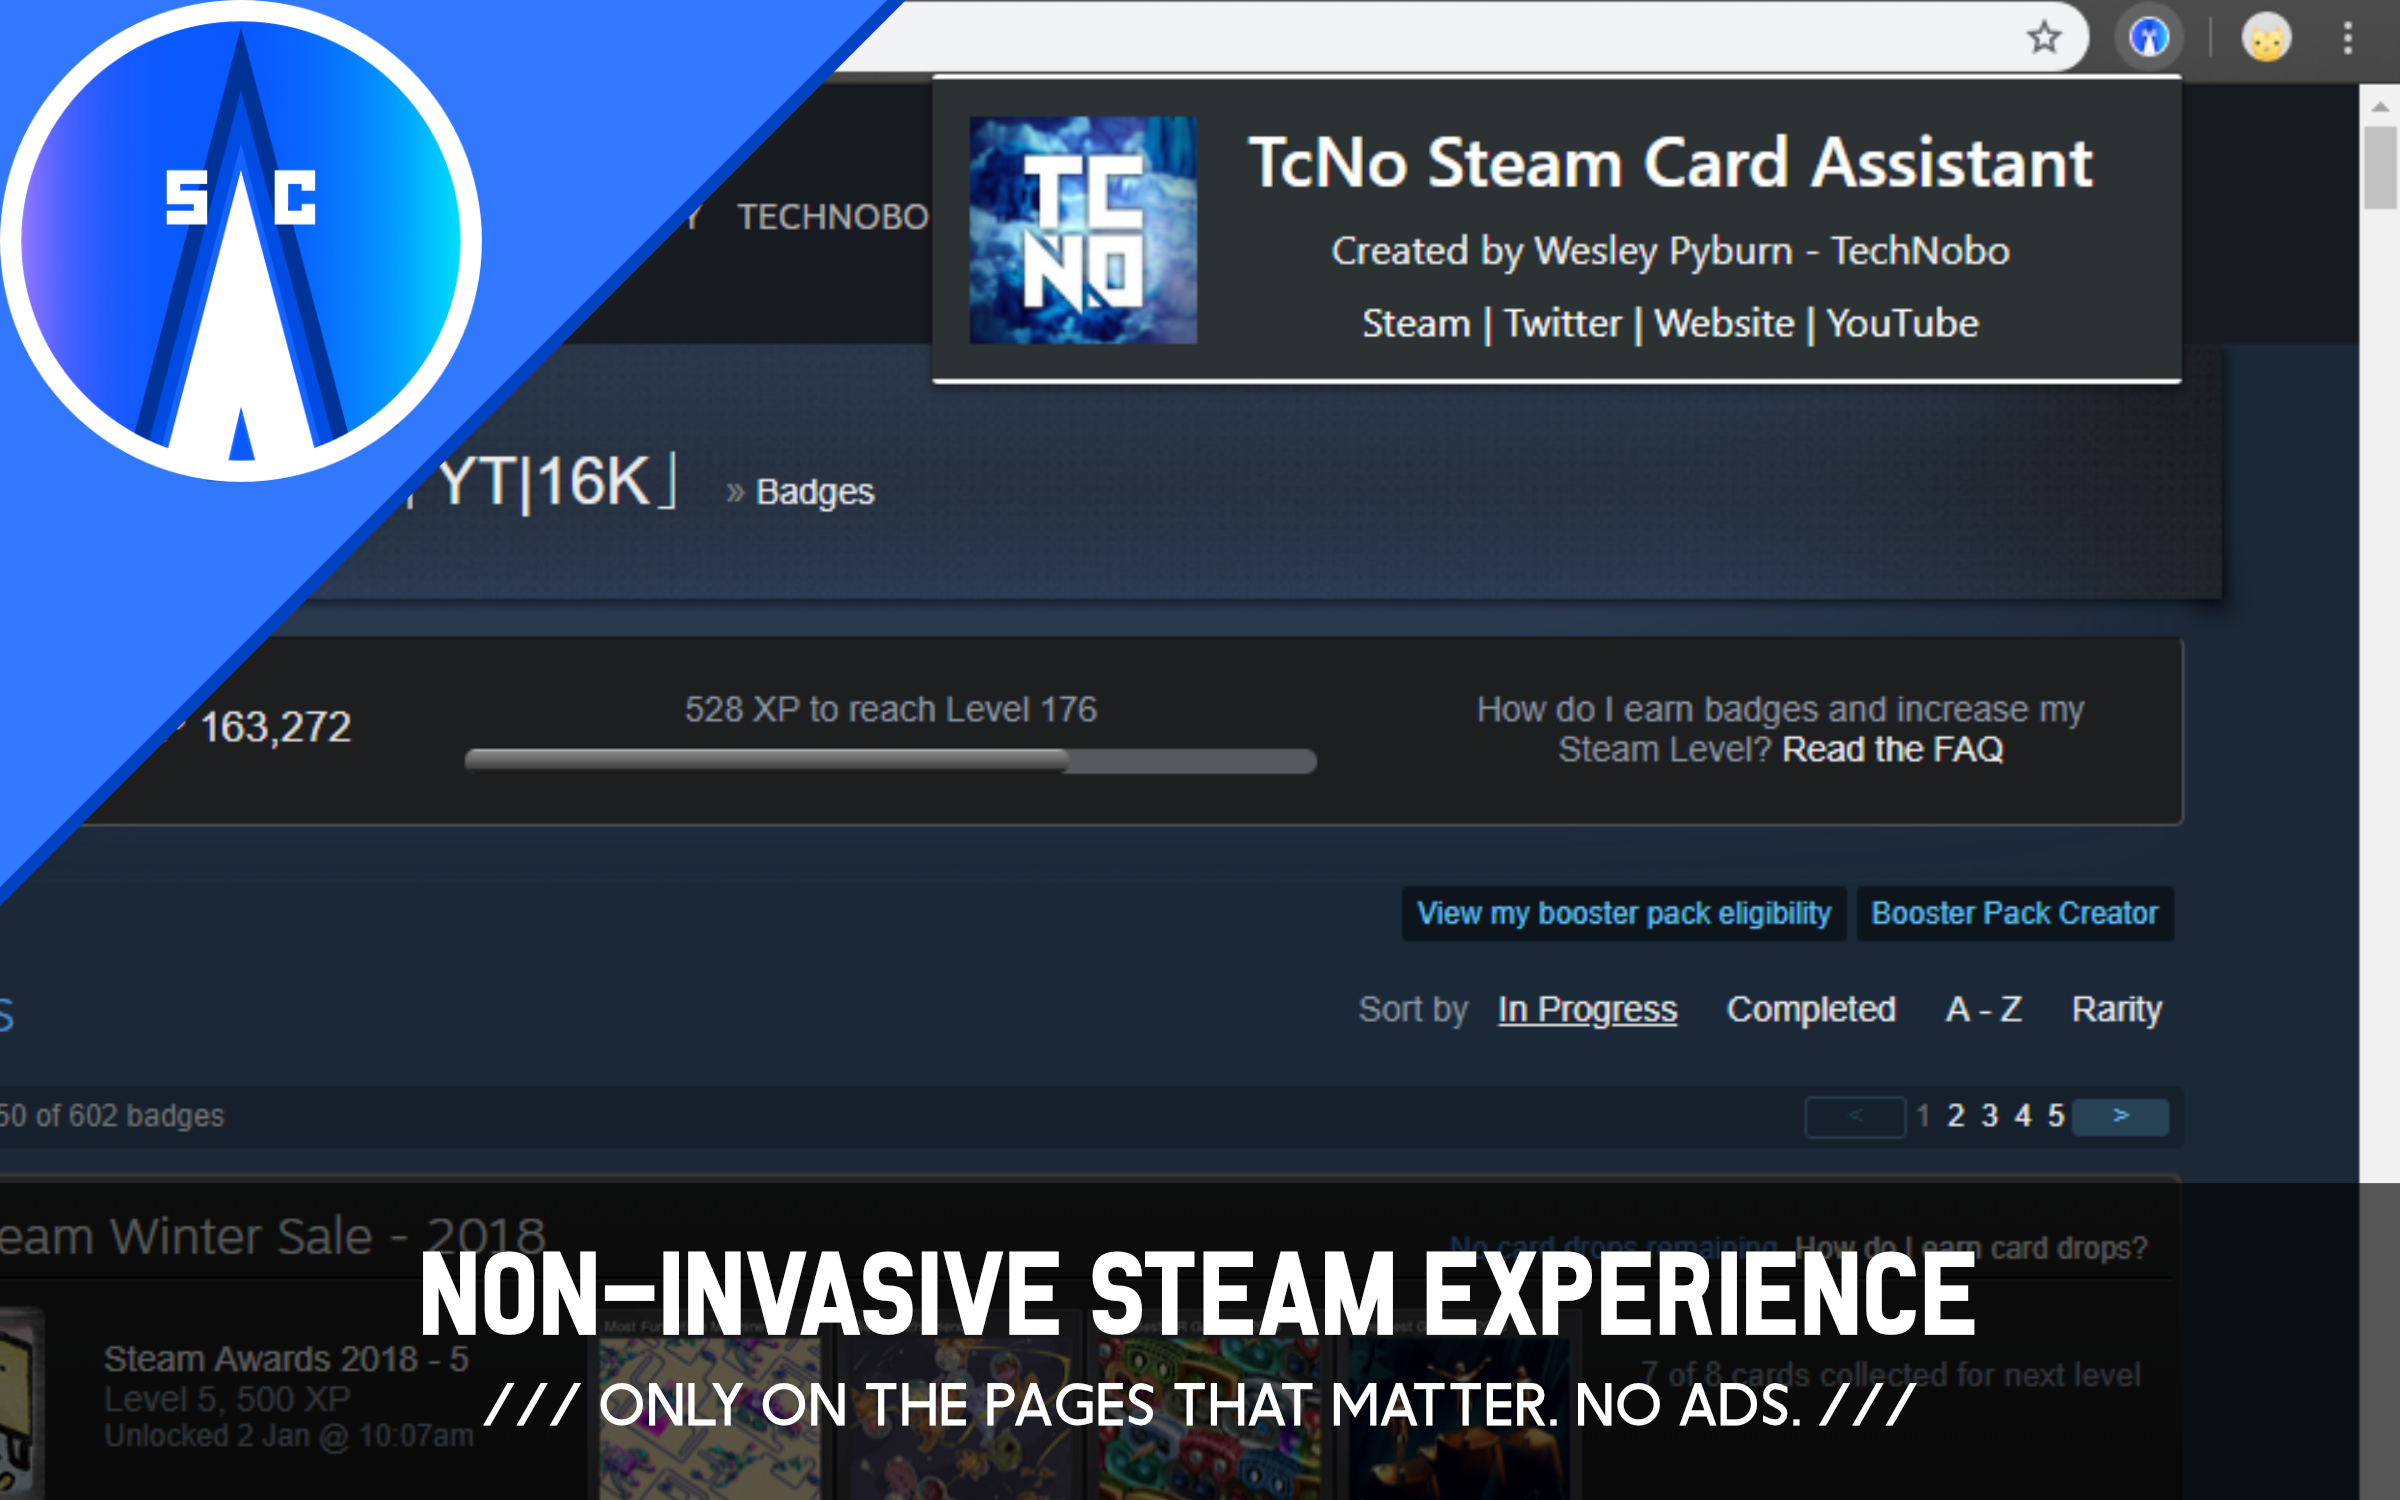 TcNo Steam Card Assistant